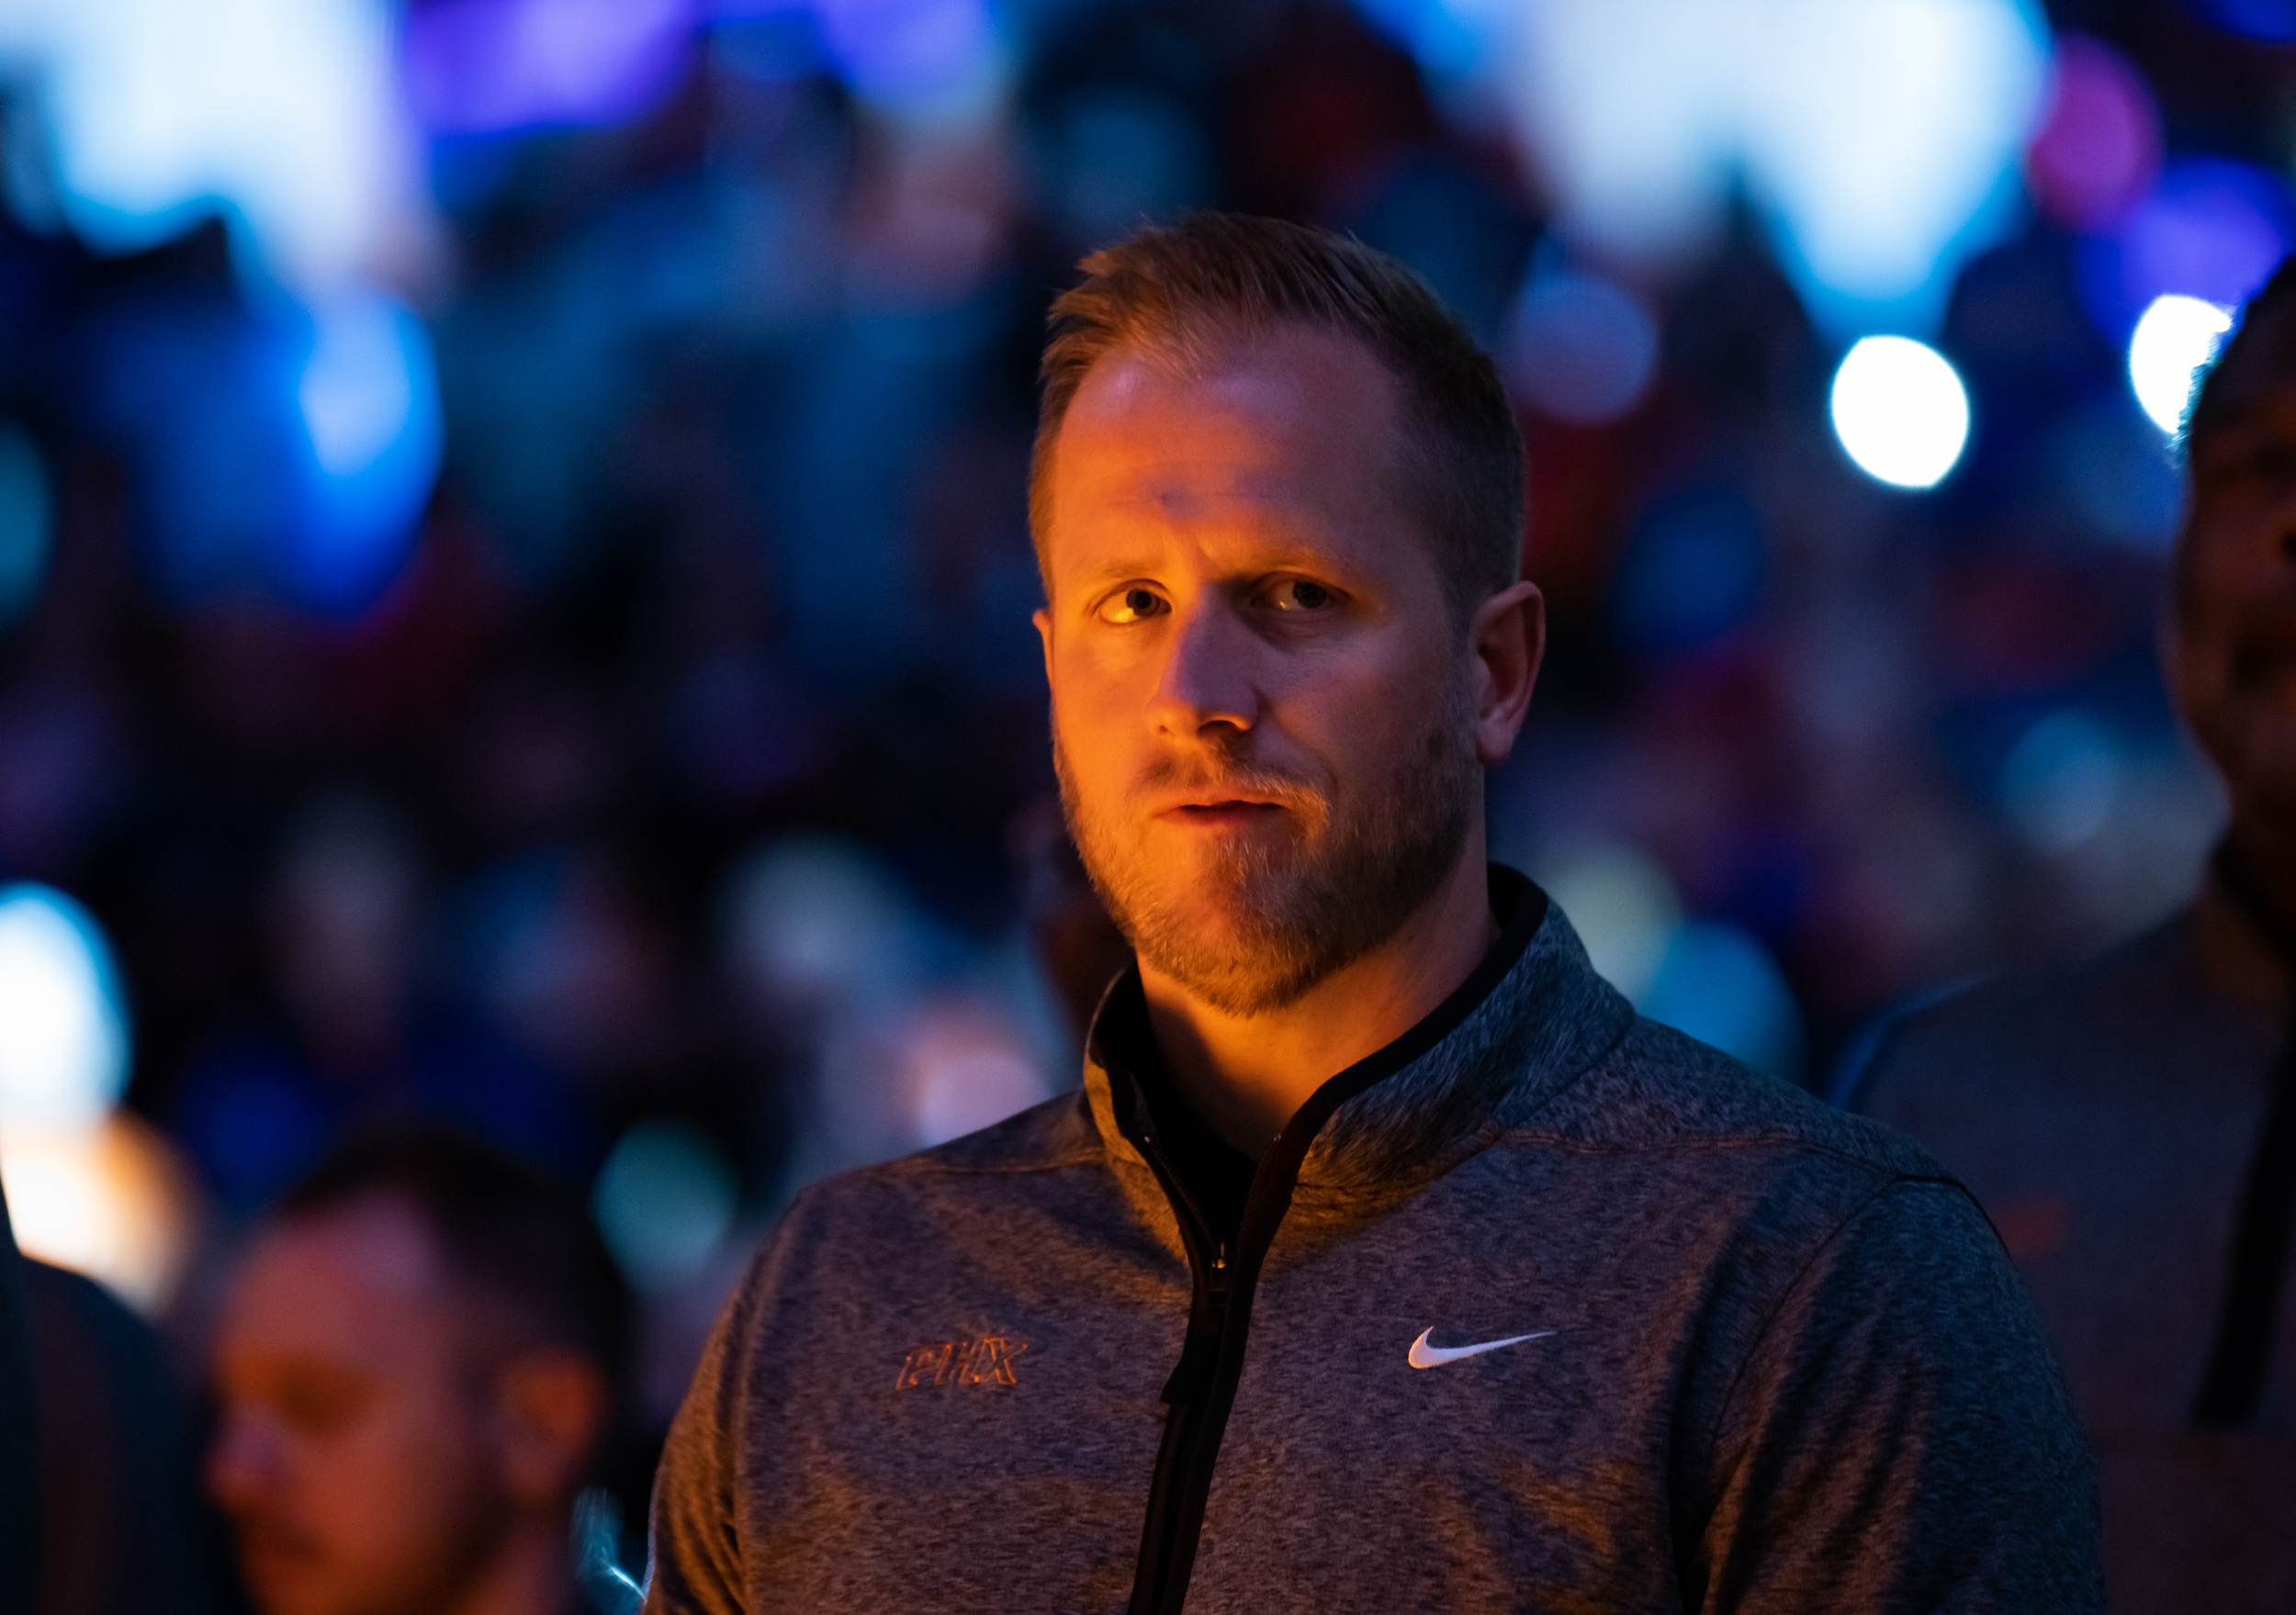 byu picks notable nba assistant coach to replace mark pope